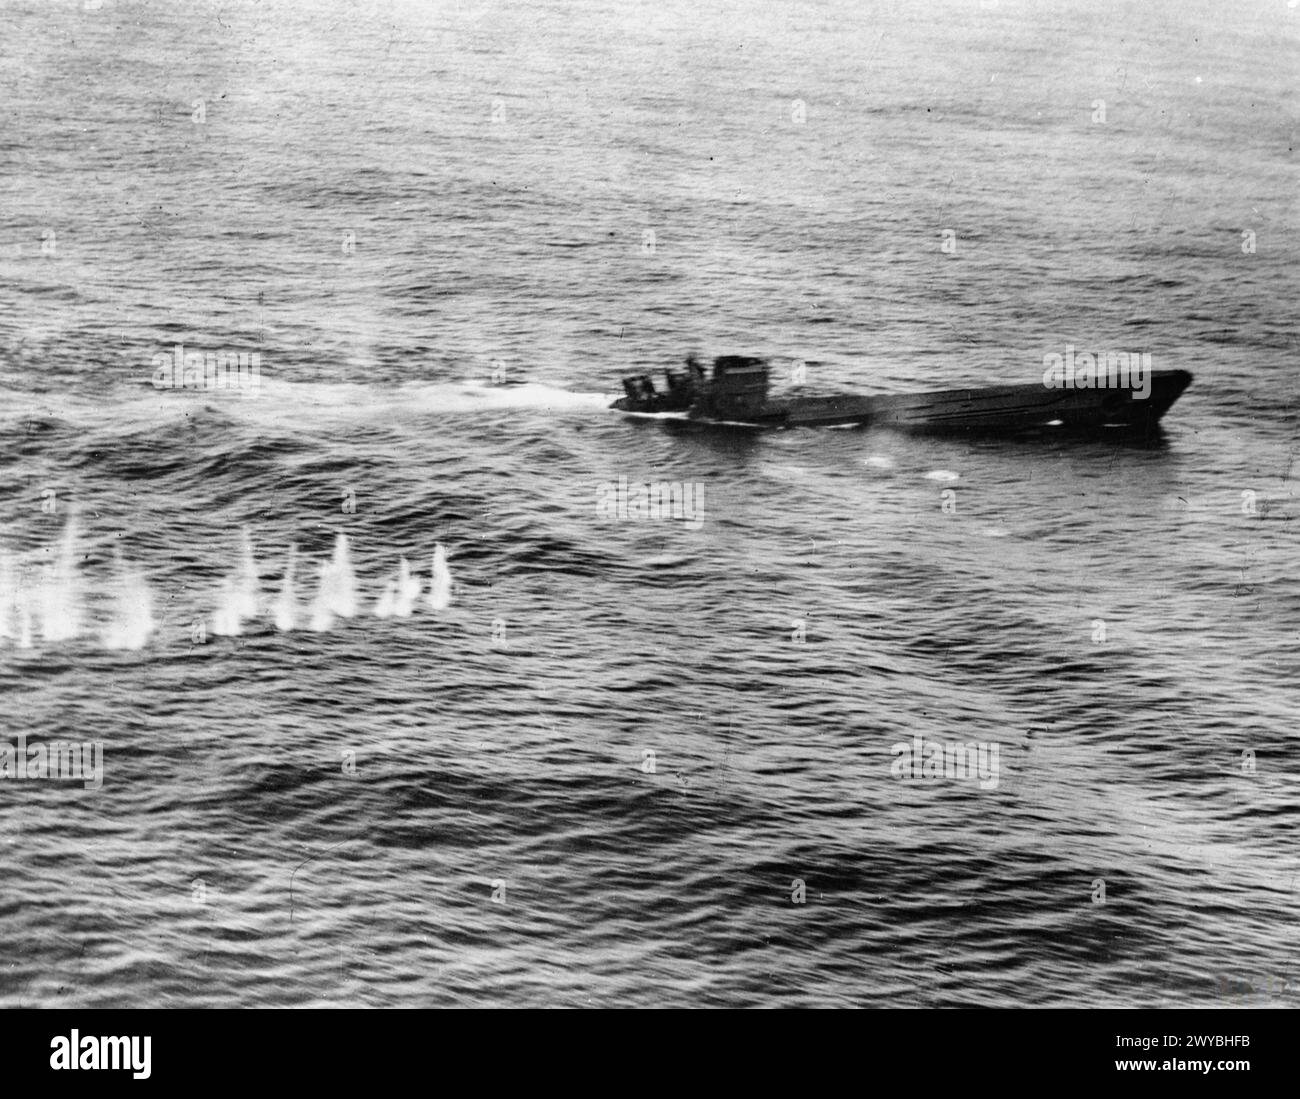 U-BOAT WARFARE 1939-1945 - U-boat Losses: U 426 a Type VIIC submarine, down by the stern and sinking, after attacks by a Short Sunderland flying boat. , German Navy (Third Reich), U-426 Stock Photo